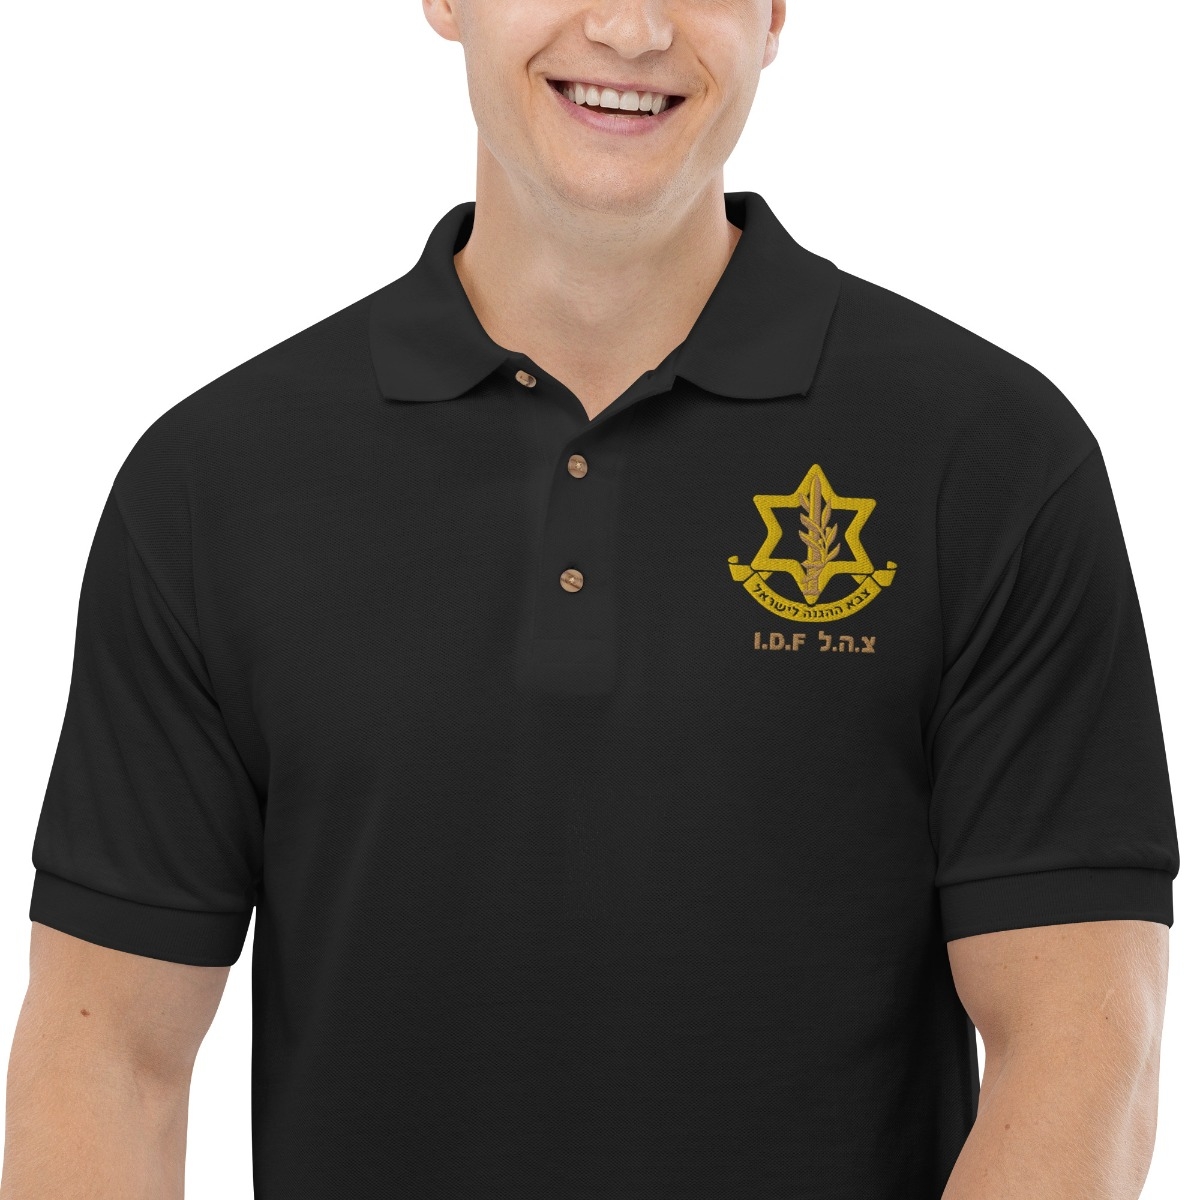 I.D.F. (Israel Defense Forces) Polo Shirt - Choice of Colors - 1